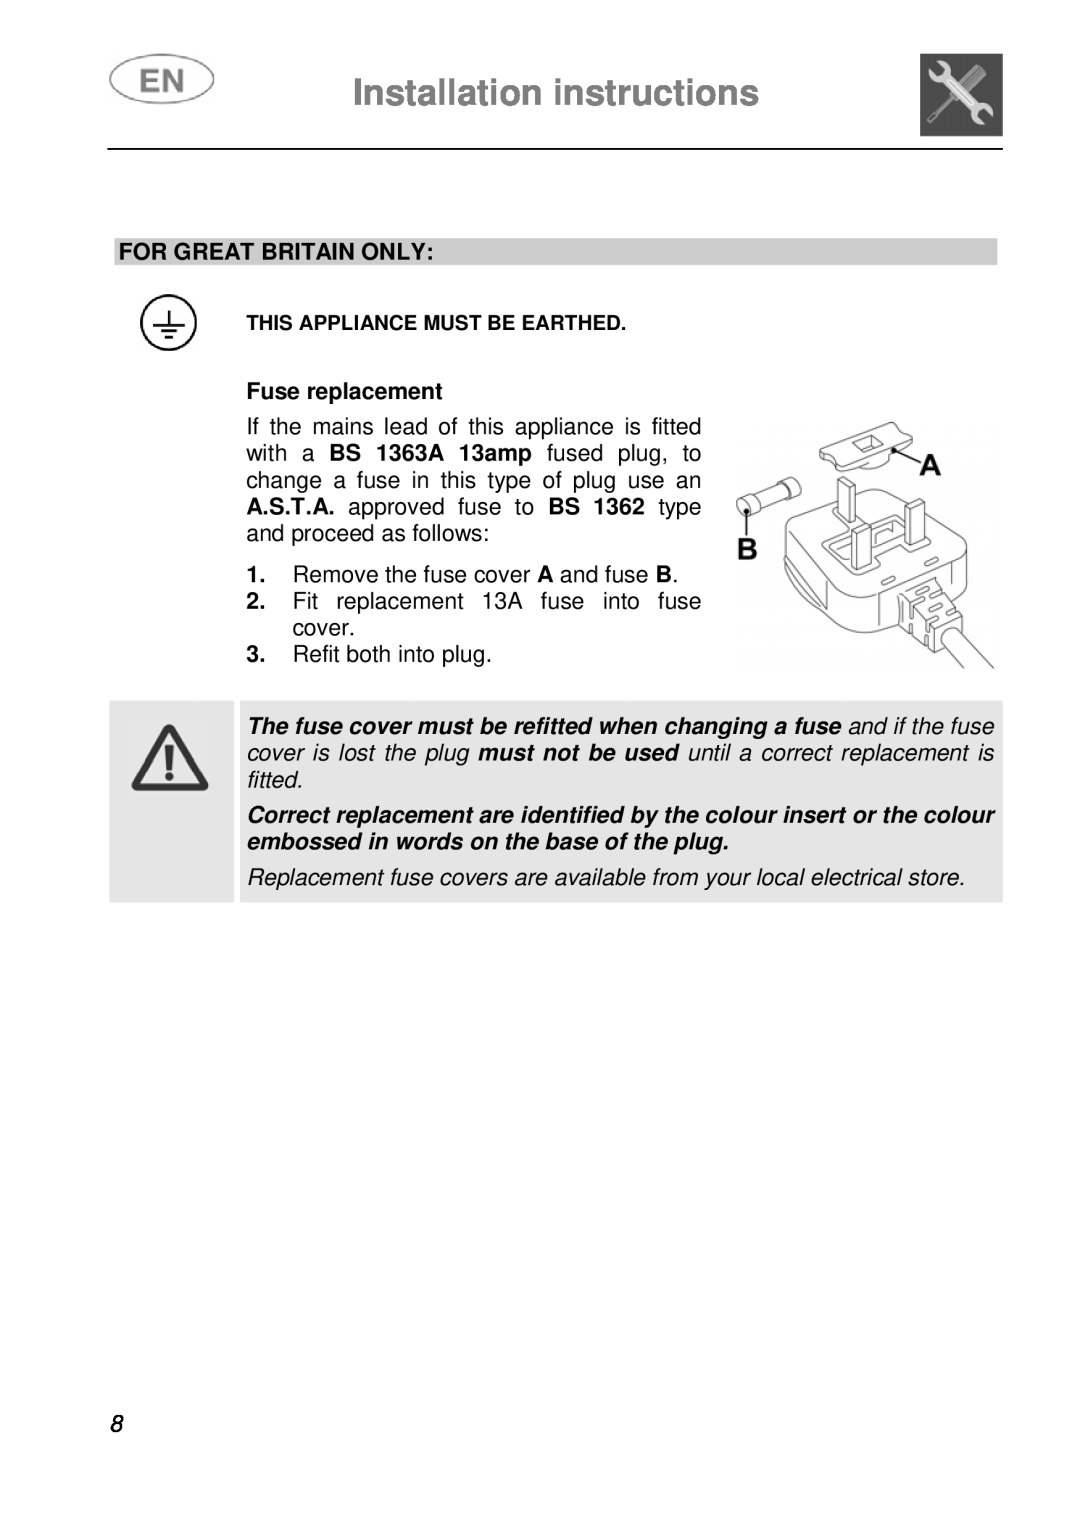 Smeg STA6246, STA6245 instruction manual Installation instructions, For Great Britain Only, Fuse replacement 